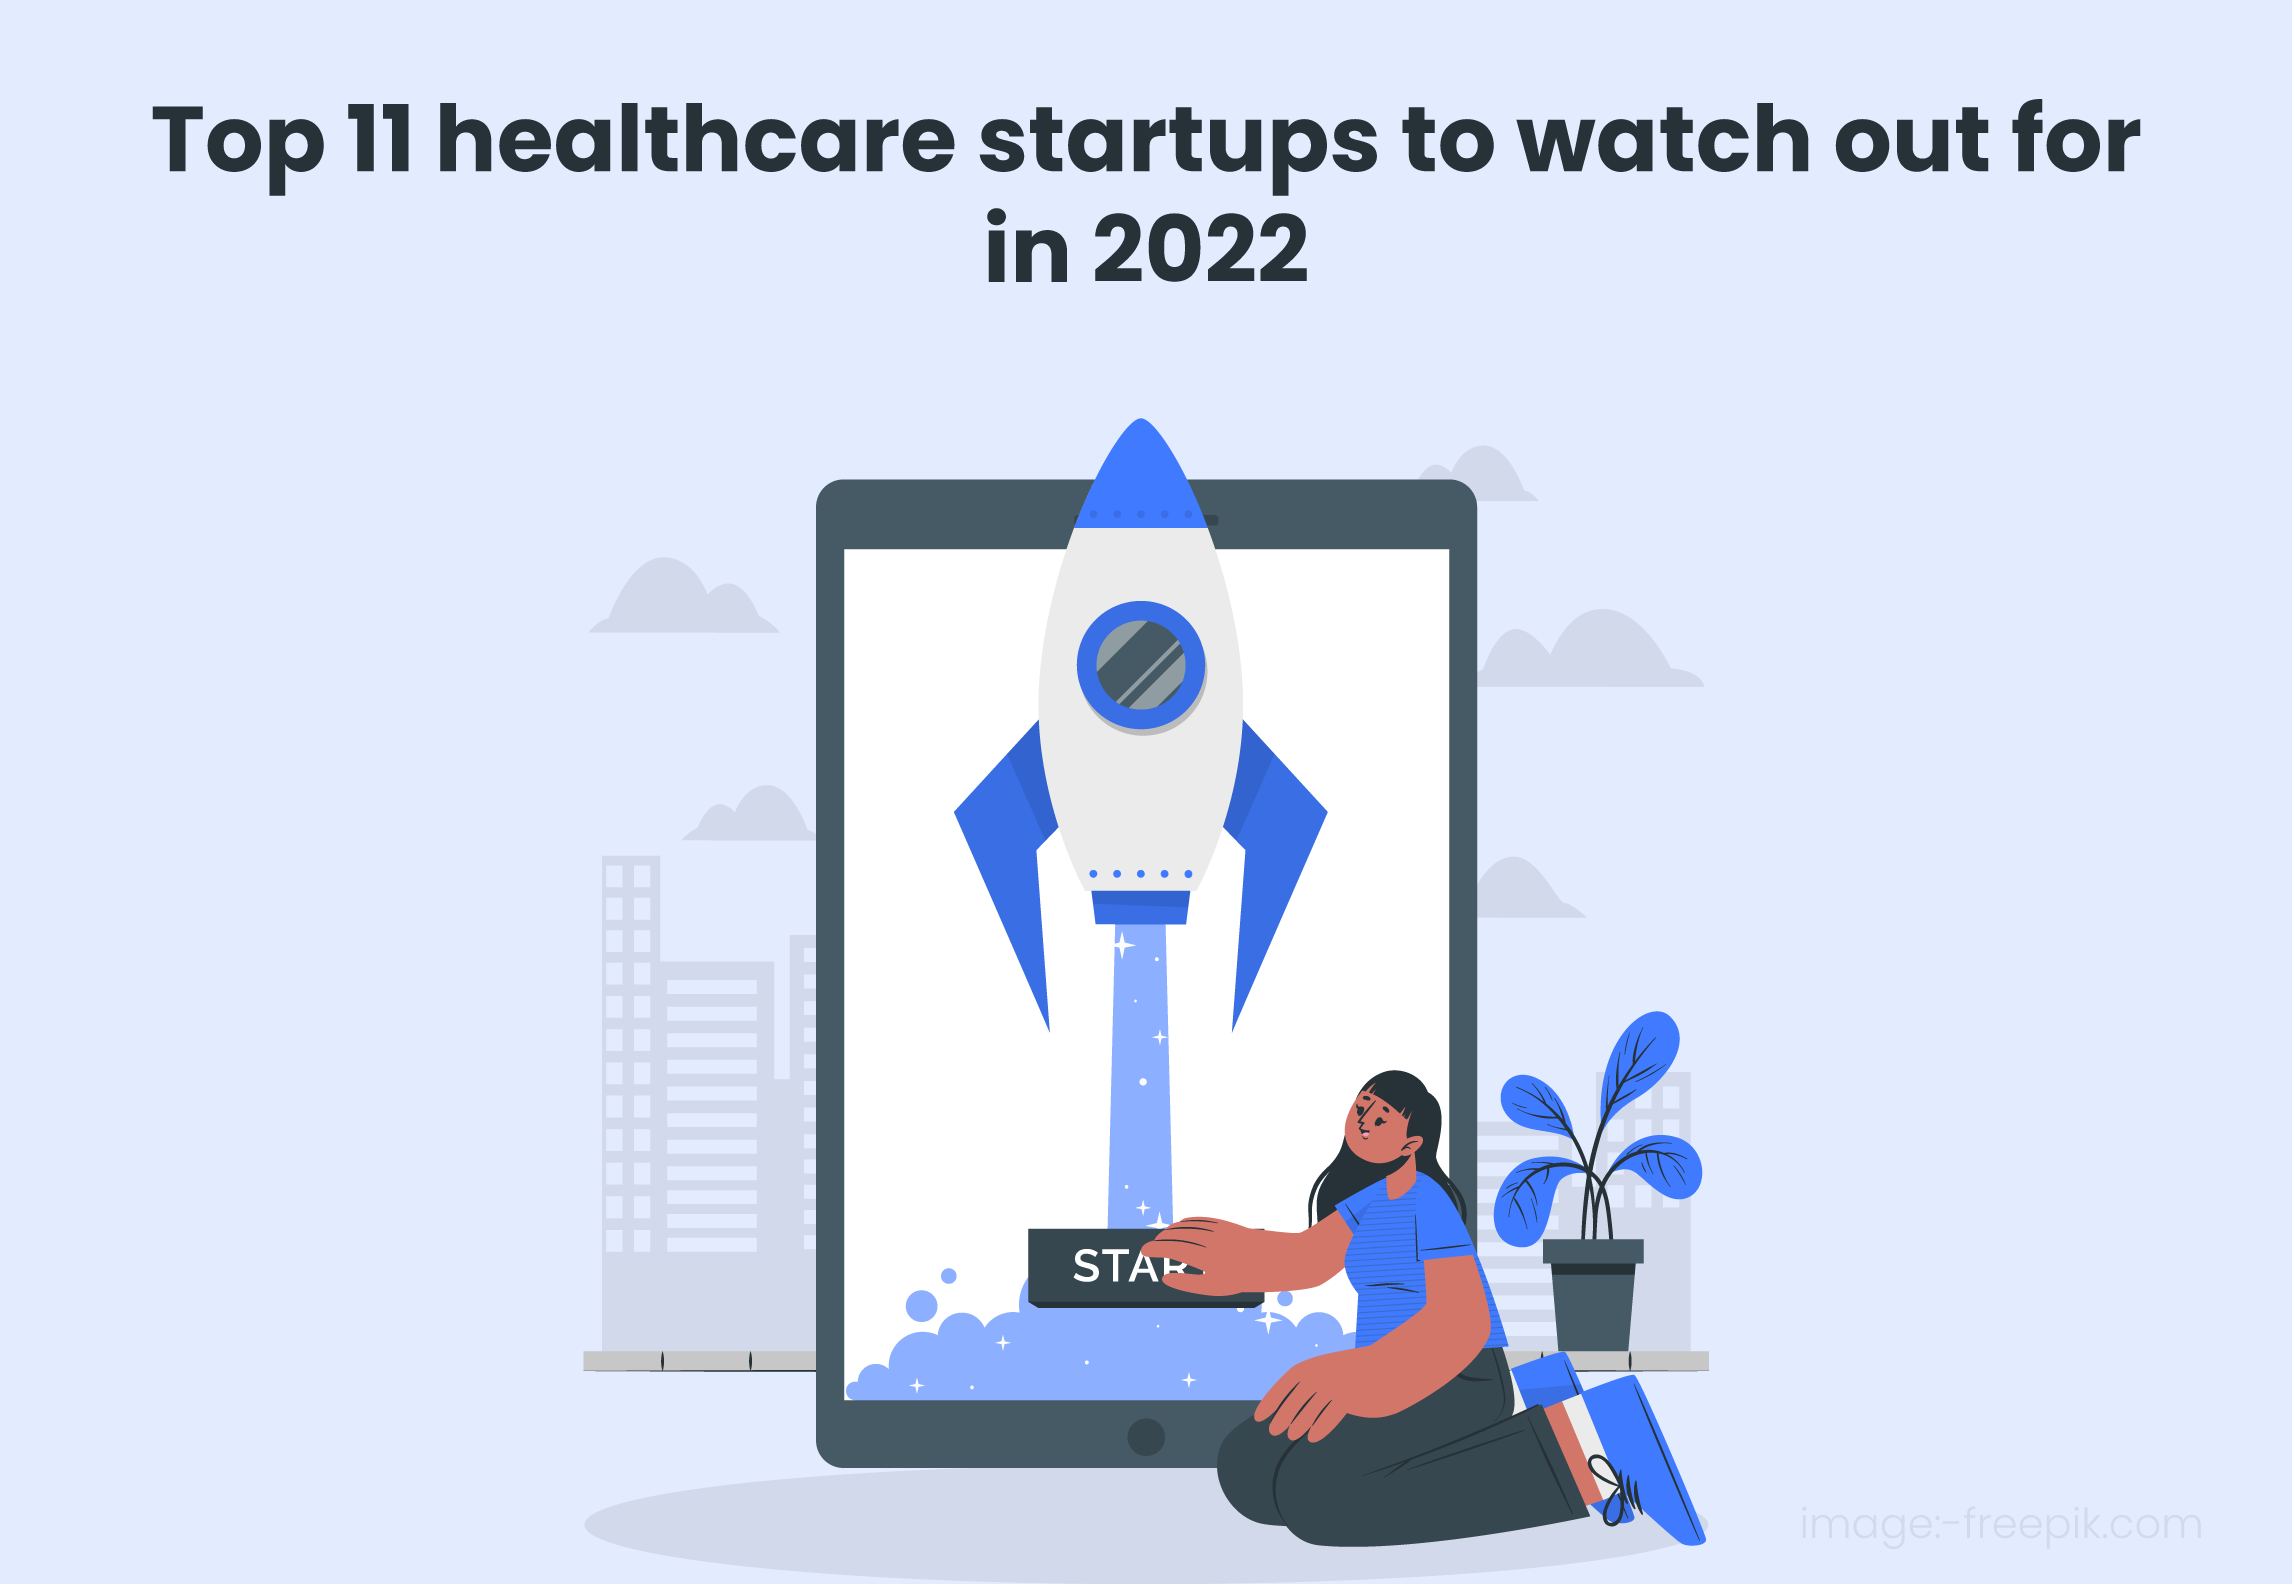 Top 11 healthcare startups to watch out for in 2022